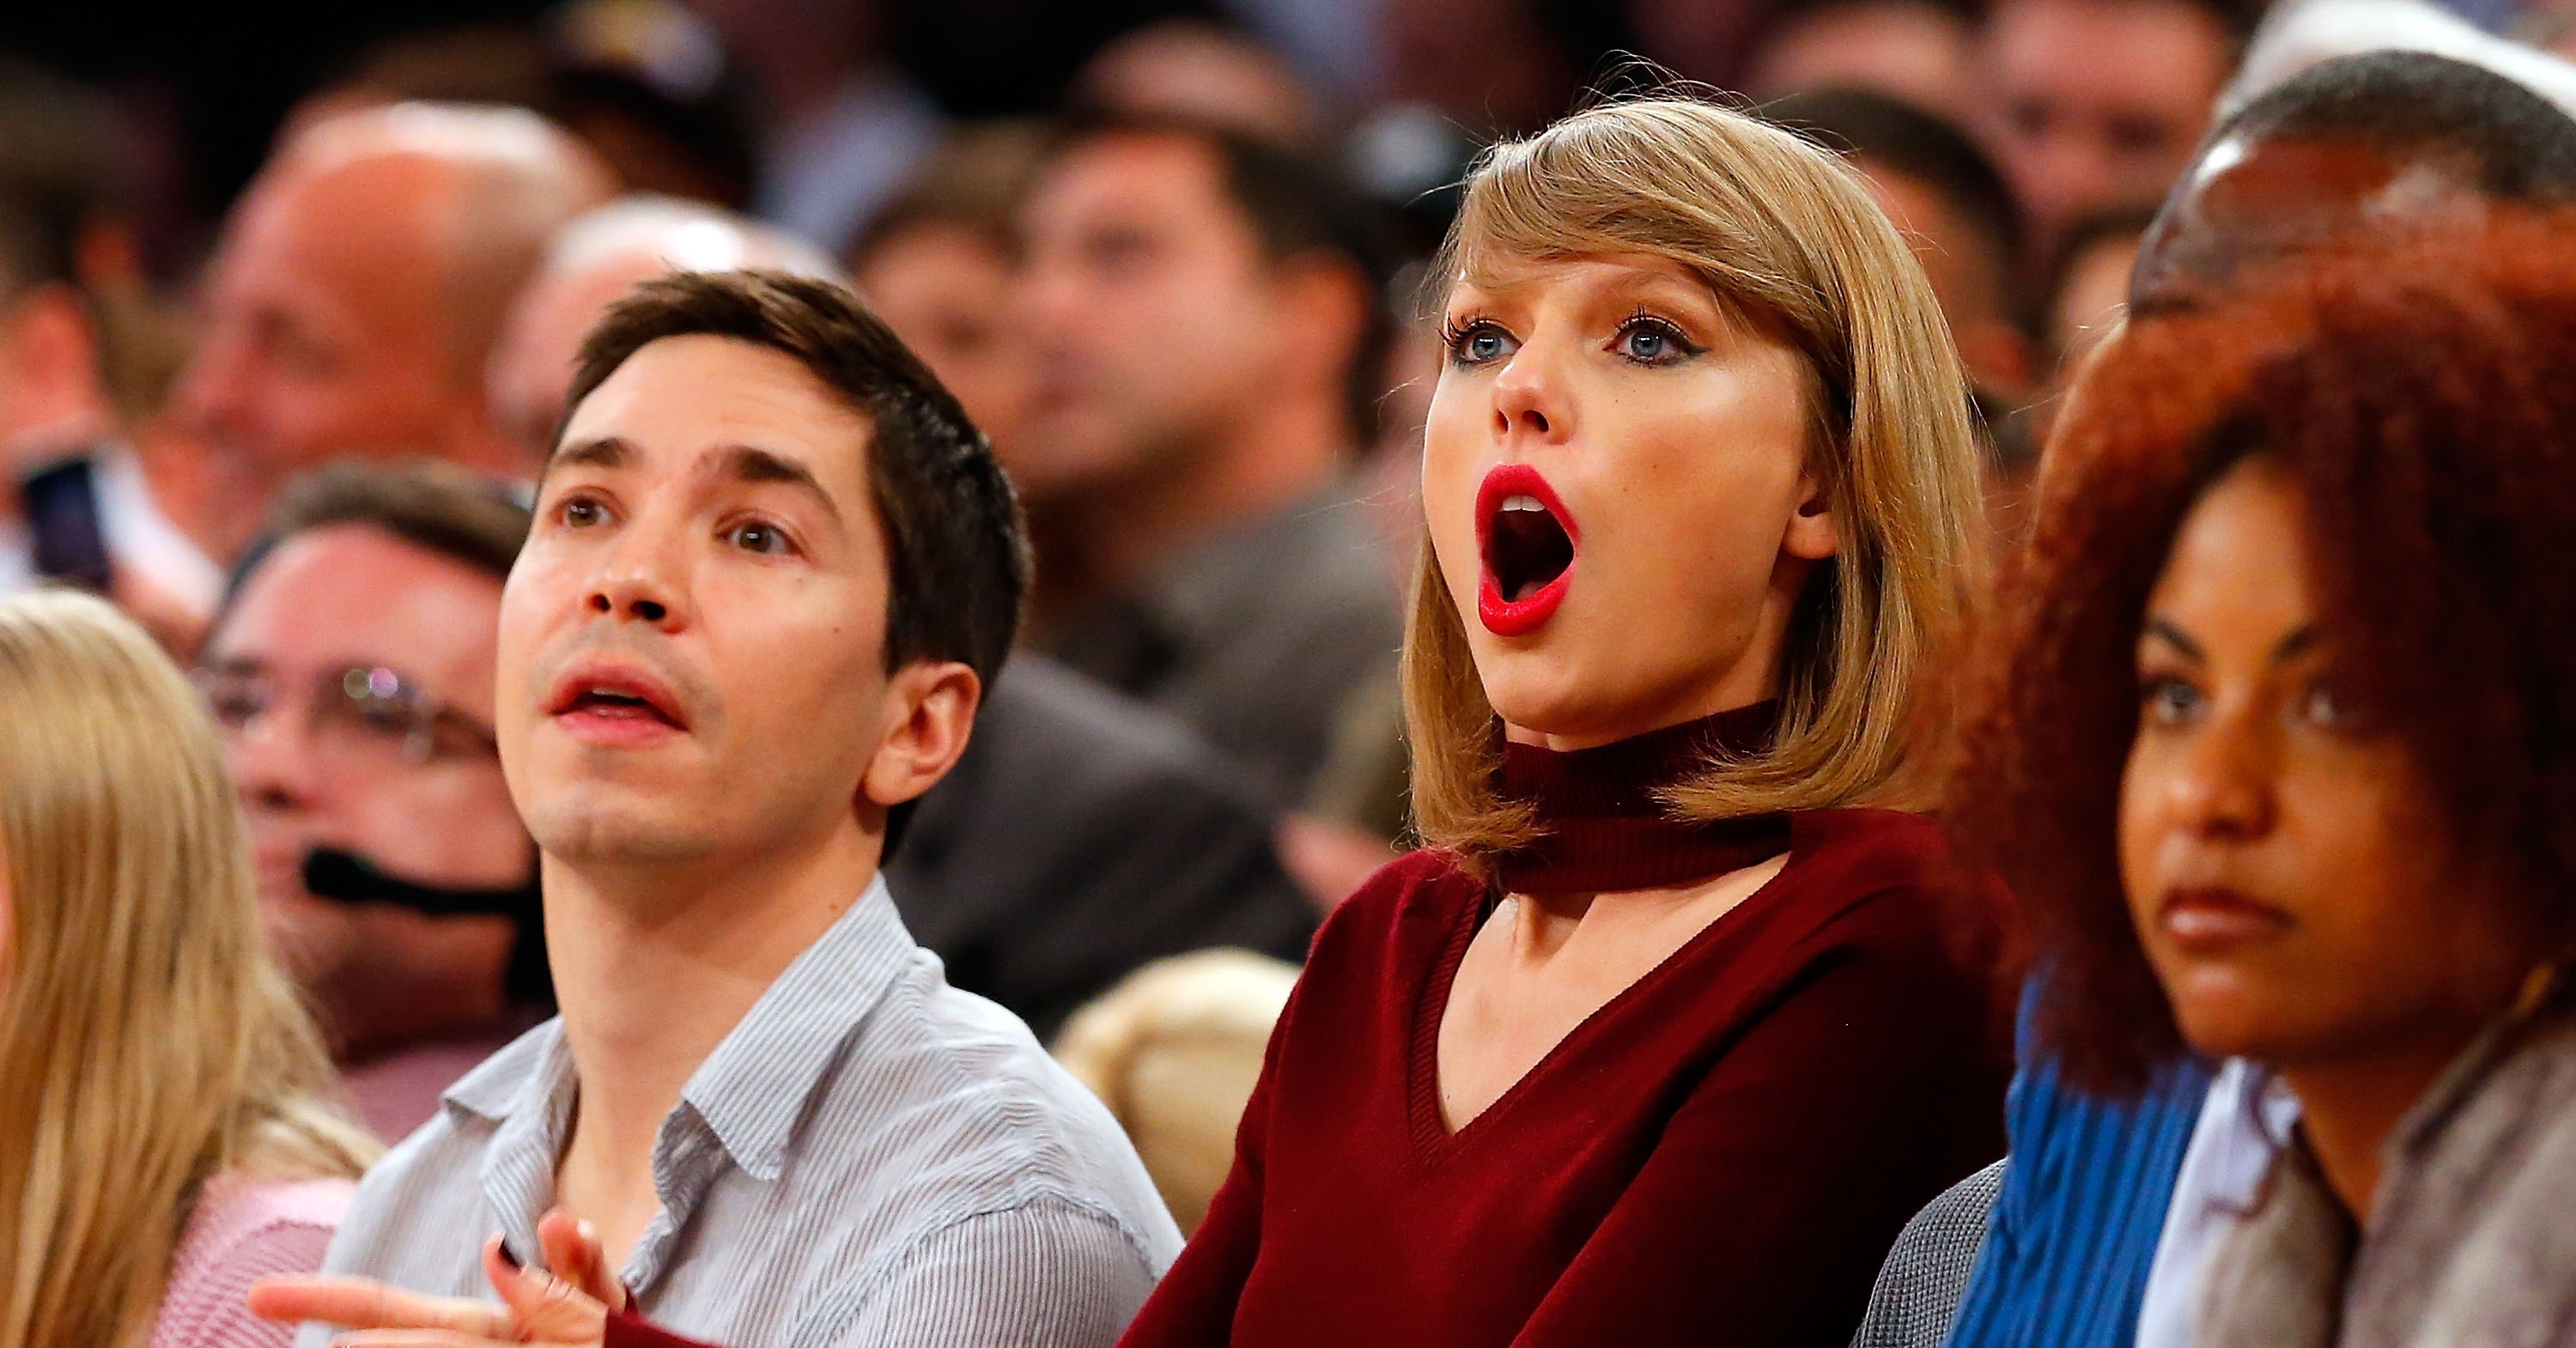 Taylor Swifts Signature Surprised Face Took On A Different Tone As 